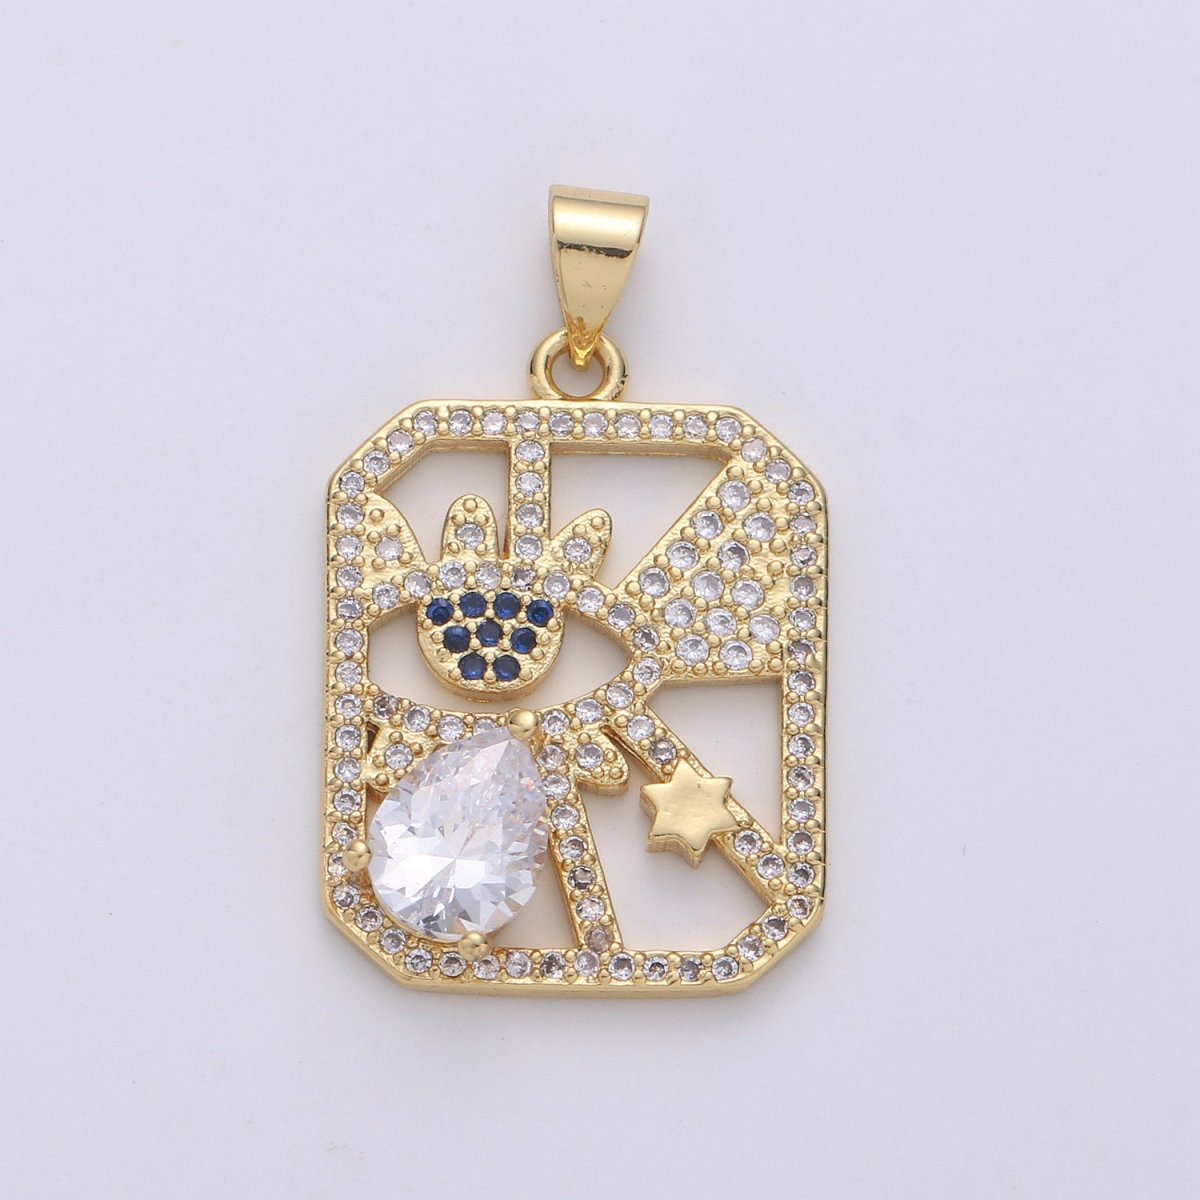 24k Gold Filled Micro Pave CZ Evil Eye Pendant Charm, Square Evil Eye Star Micro Pave CZ Pendant Charm, For DIY Jewelry I-875 - DLUXCA